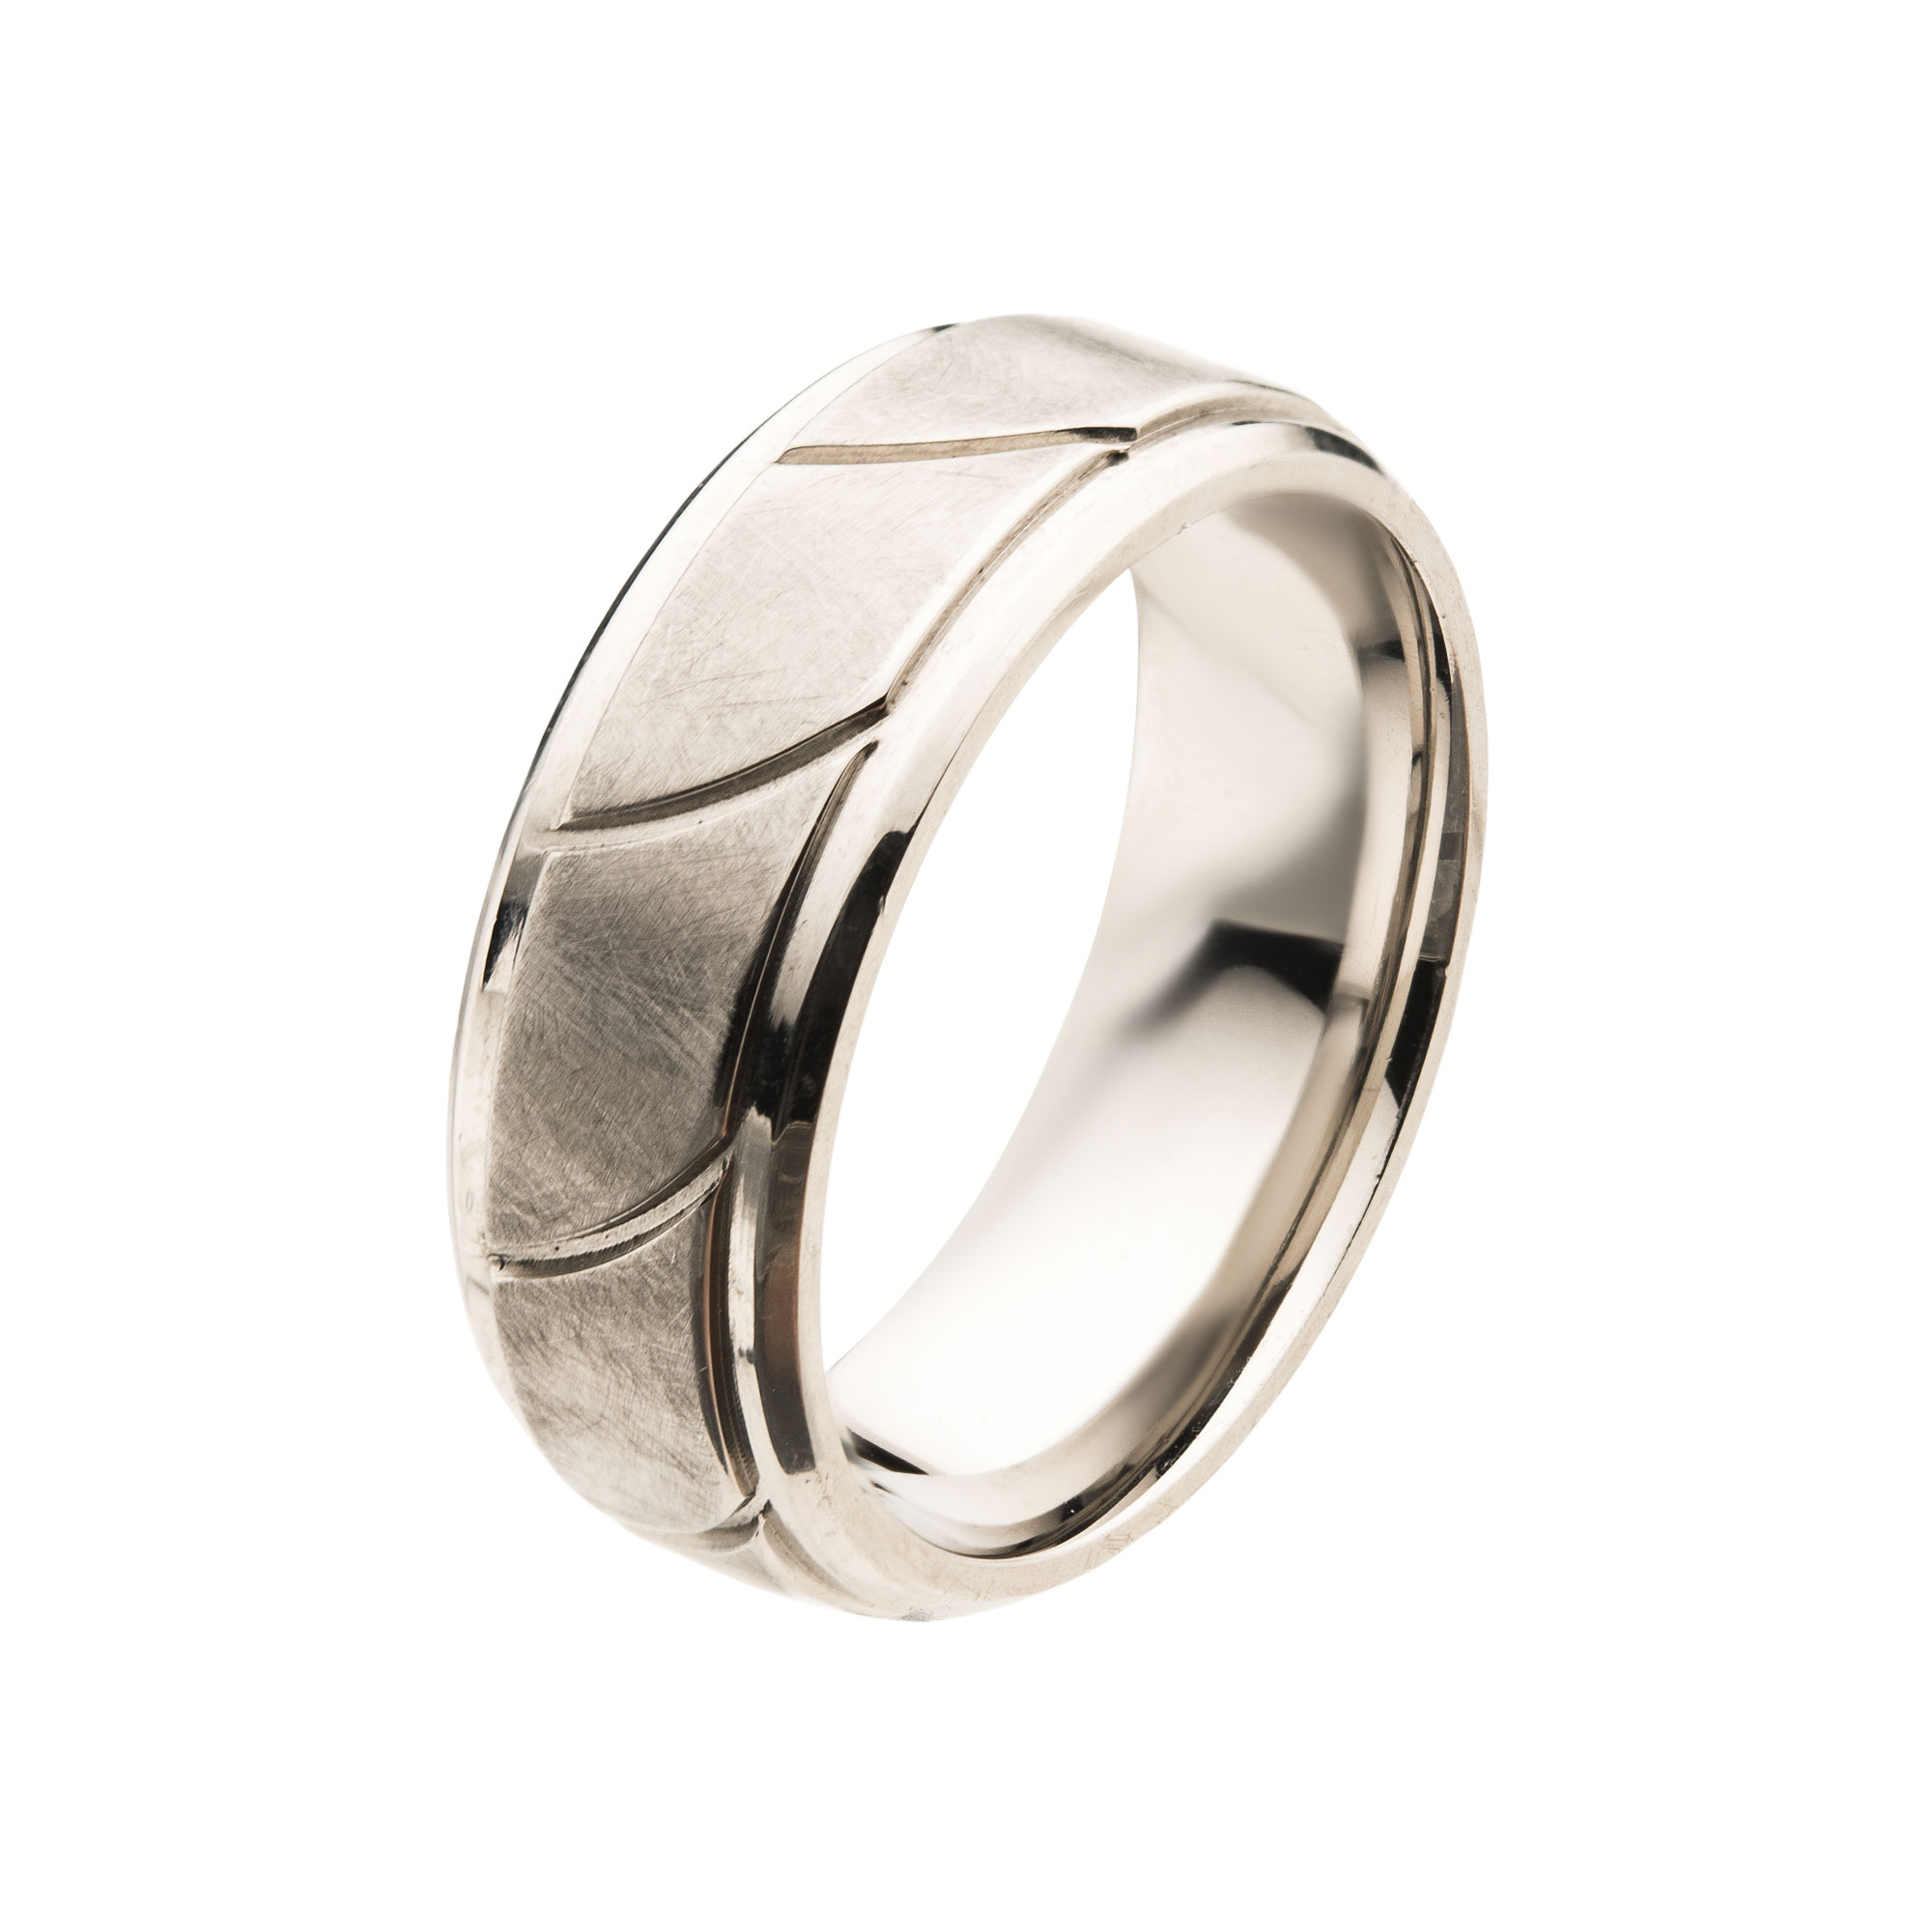 Steel Brushed with Grooves Beveled Ring Lewis Jewelers, Inc. Ansonia, CT